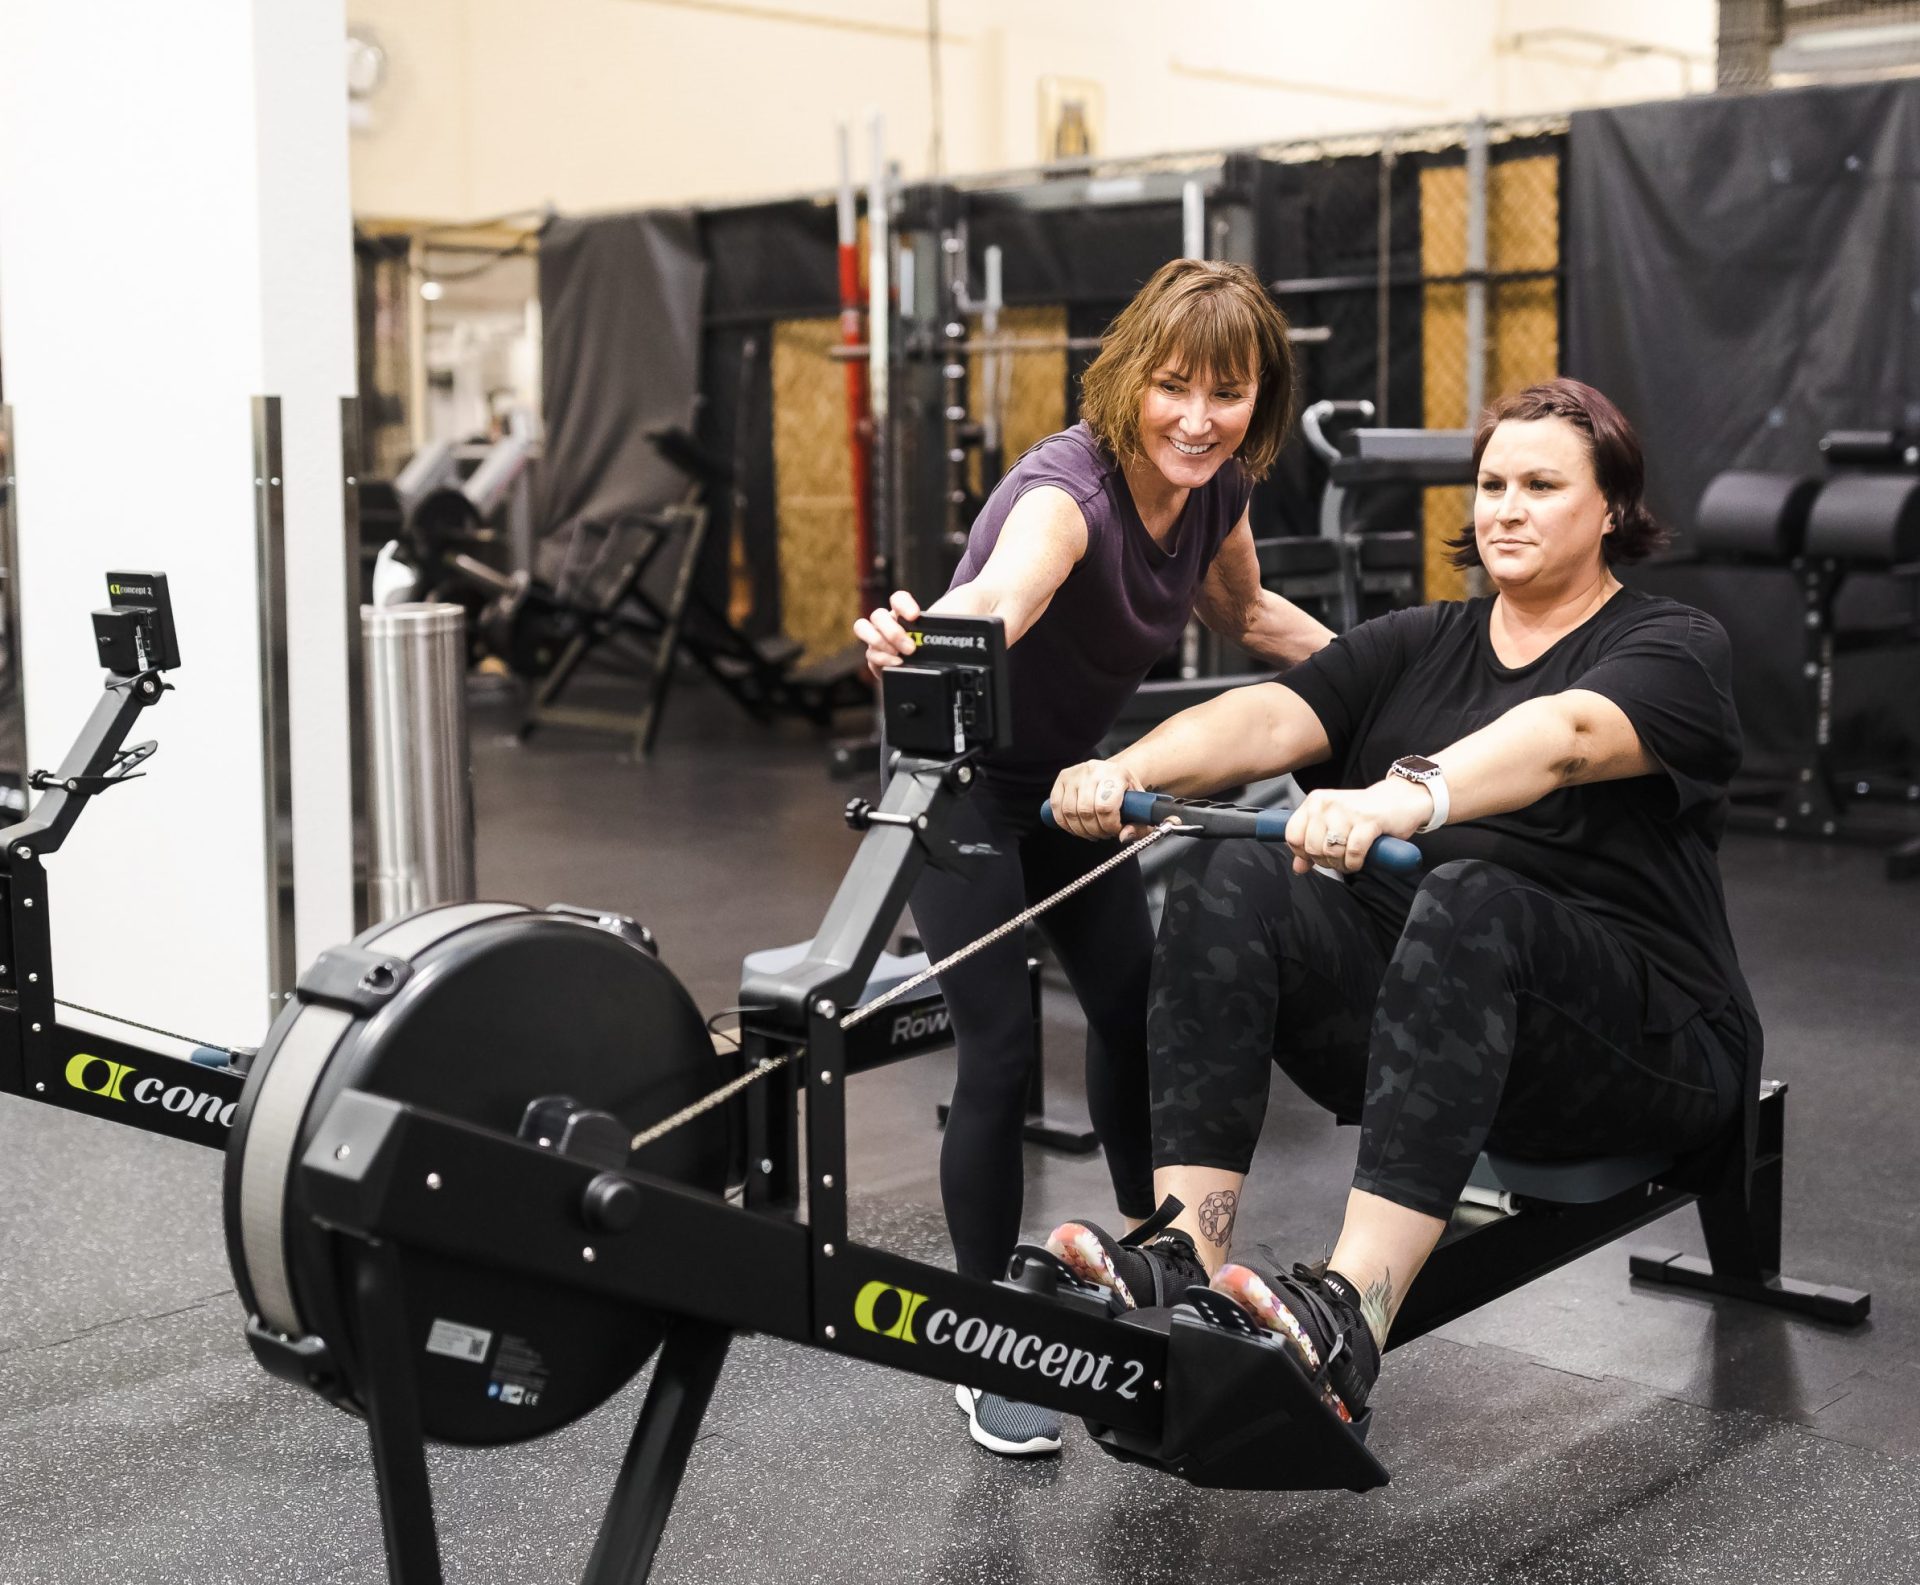 Personal Trainer explaining a workout on the rowing machine to her client.